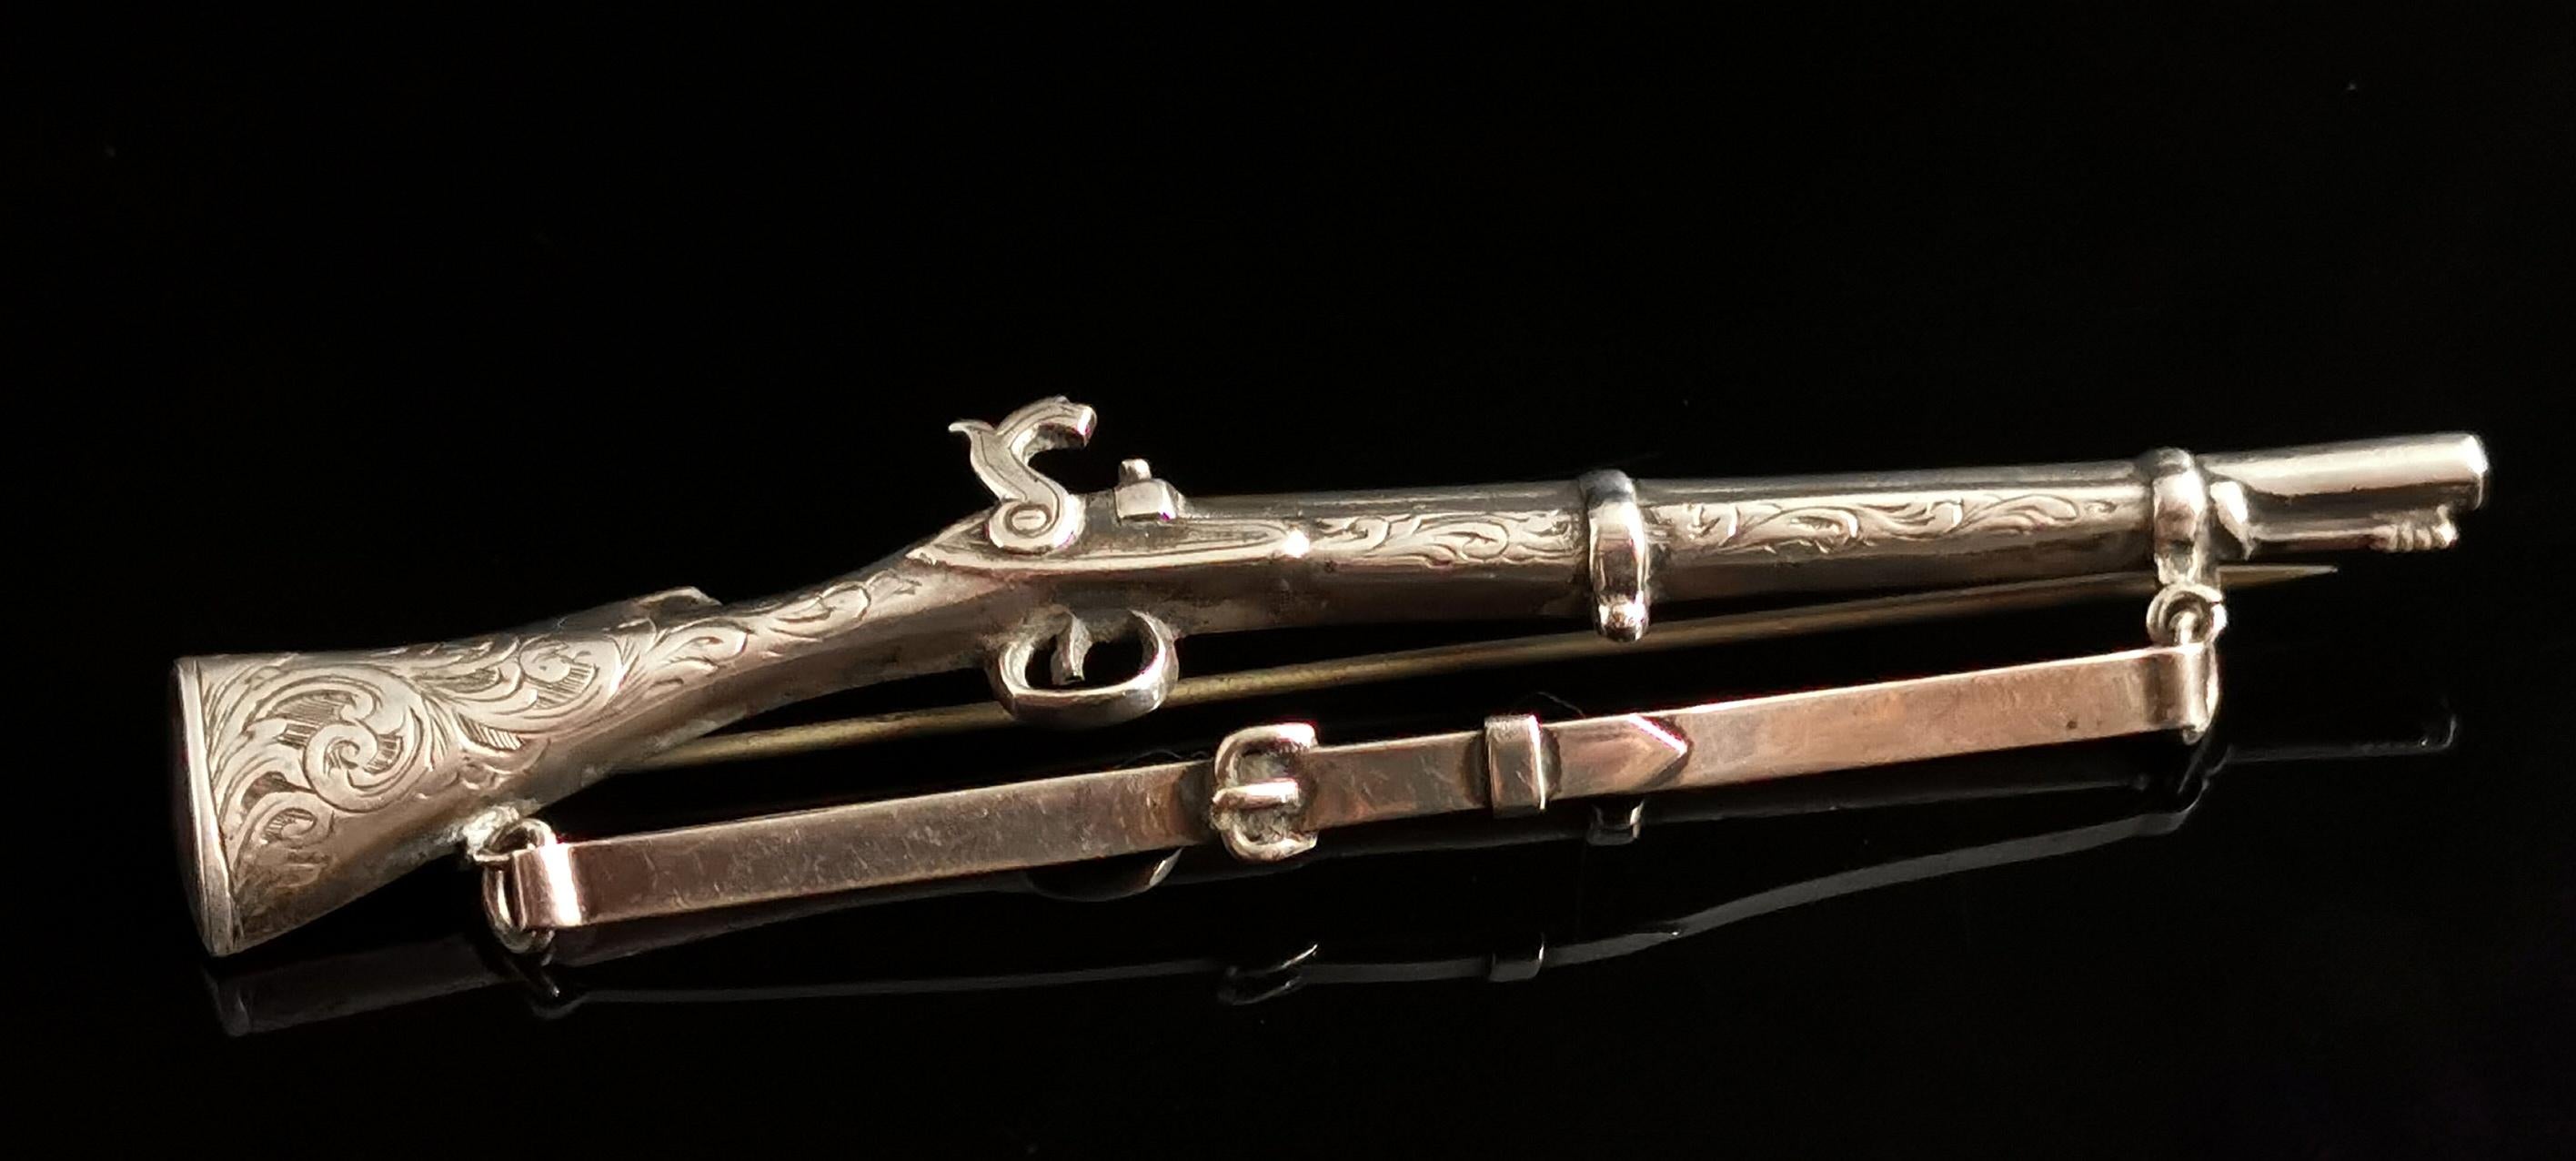 A stunning antique Victorian era Scottish sterling silver musket or rifle brooch.

It is a large and highly detailed piece, the front is engraved with aesthetic style swirls of foliate.

It has an articulated belt strap hung at the bottom of the